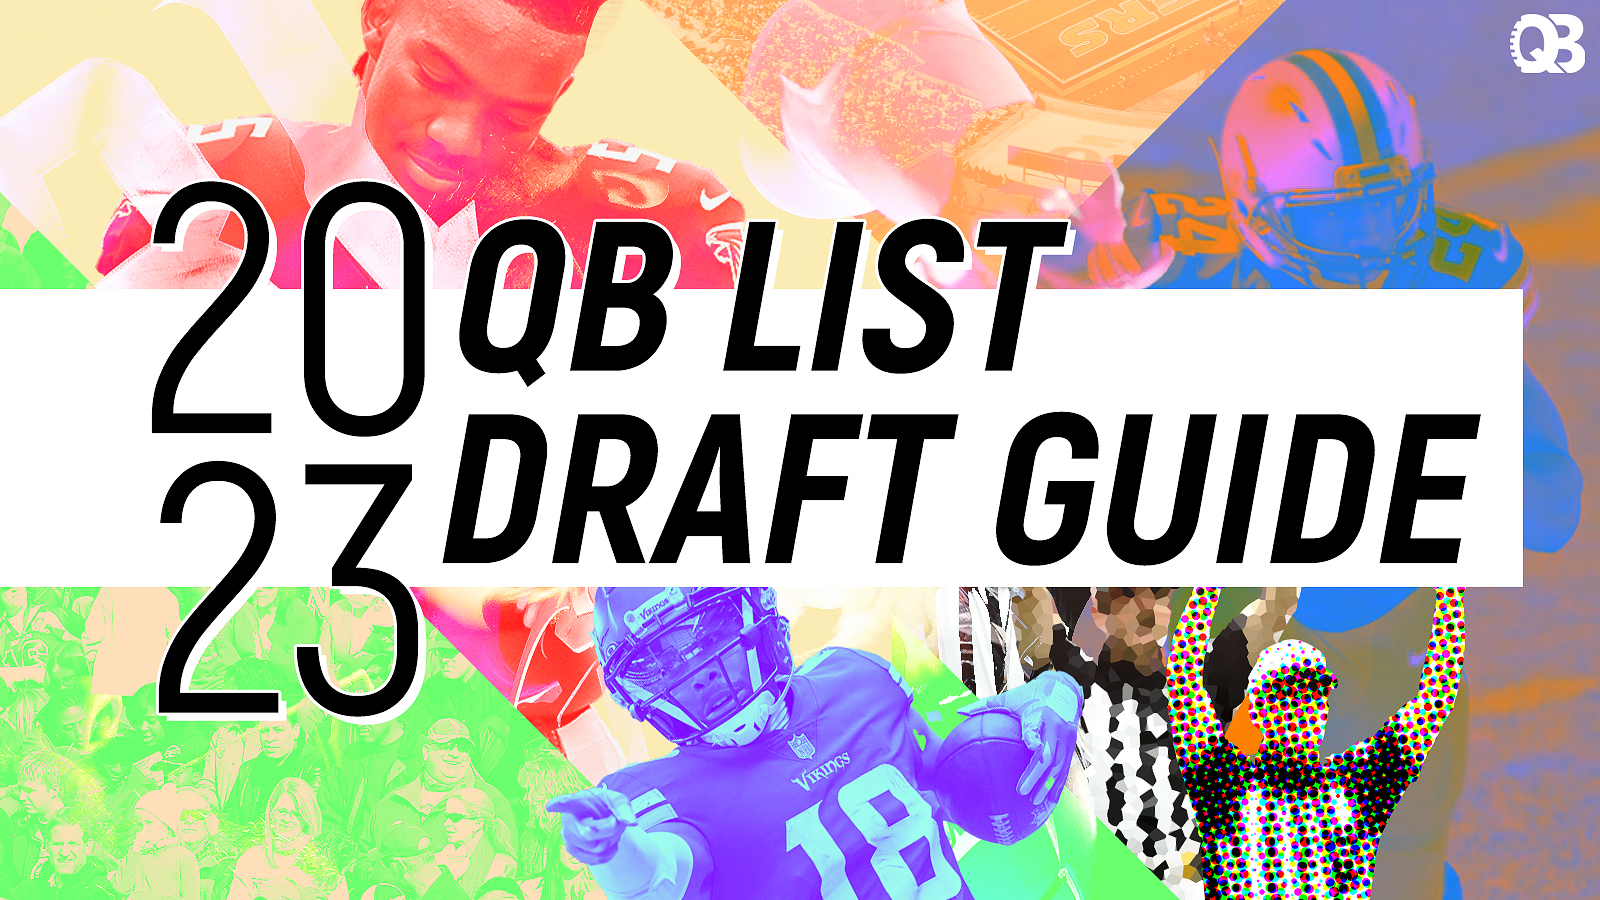 Fantasy Football 2023 Draft Prep: Updated TE Tiers & Strategies point to  best & worst ways to draft position 